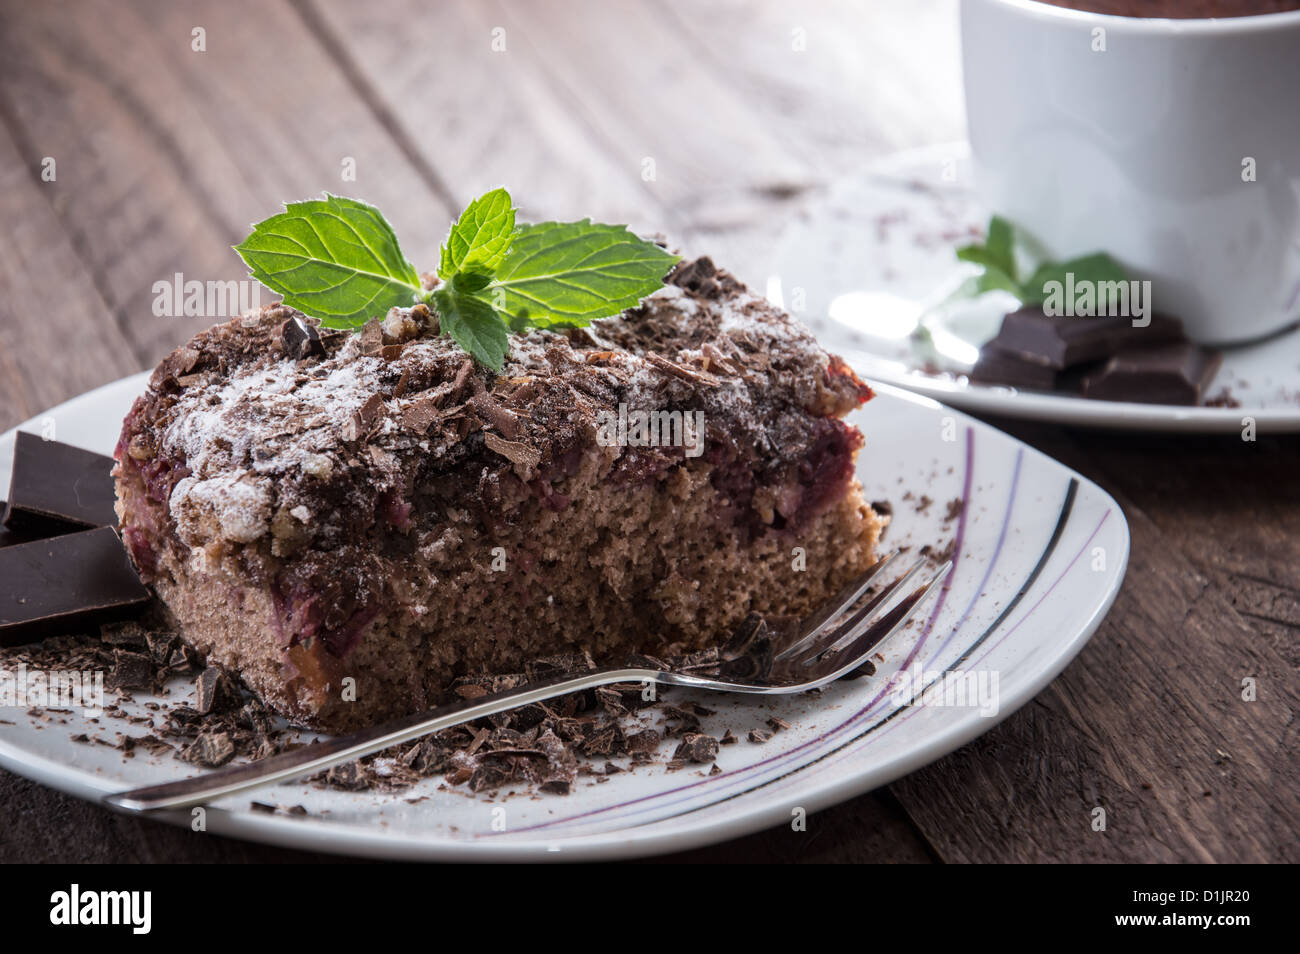 Piece of fresh baked Chocolate Cake on wooden background Stock Photo